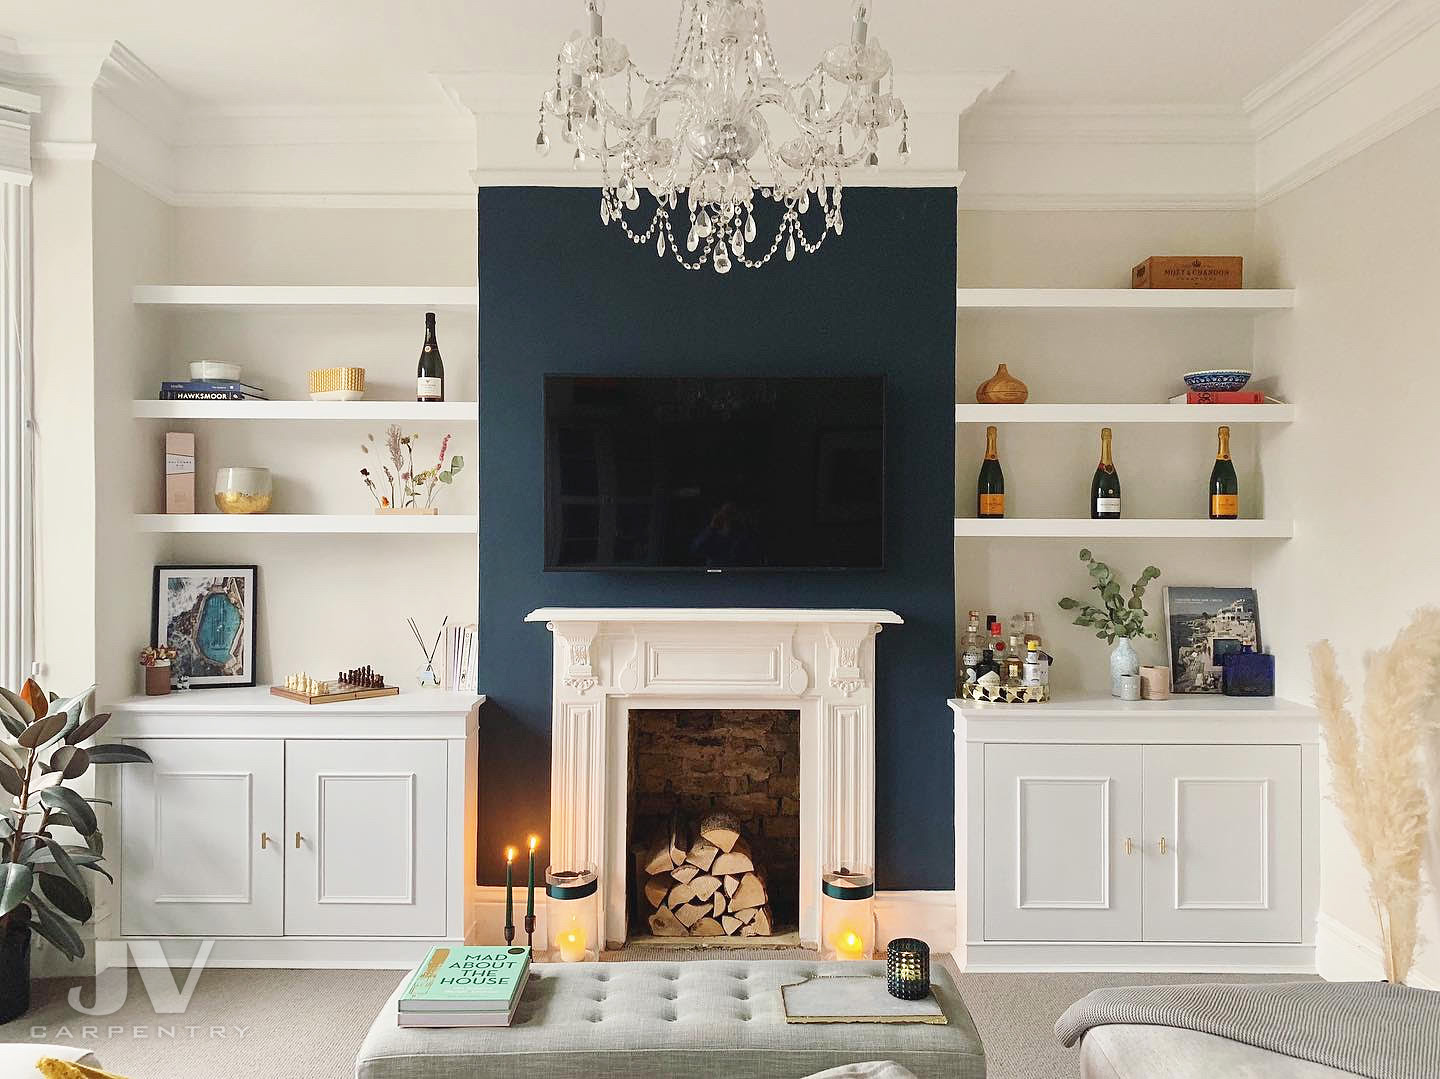 23 Alcove Shelving Ideas For Your, Built In Bookshelves On Either Side Of Fireplace